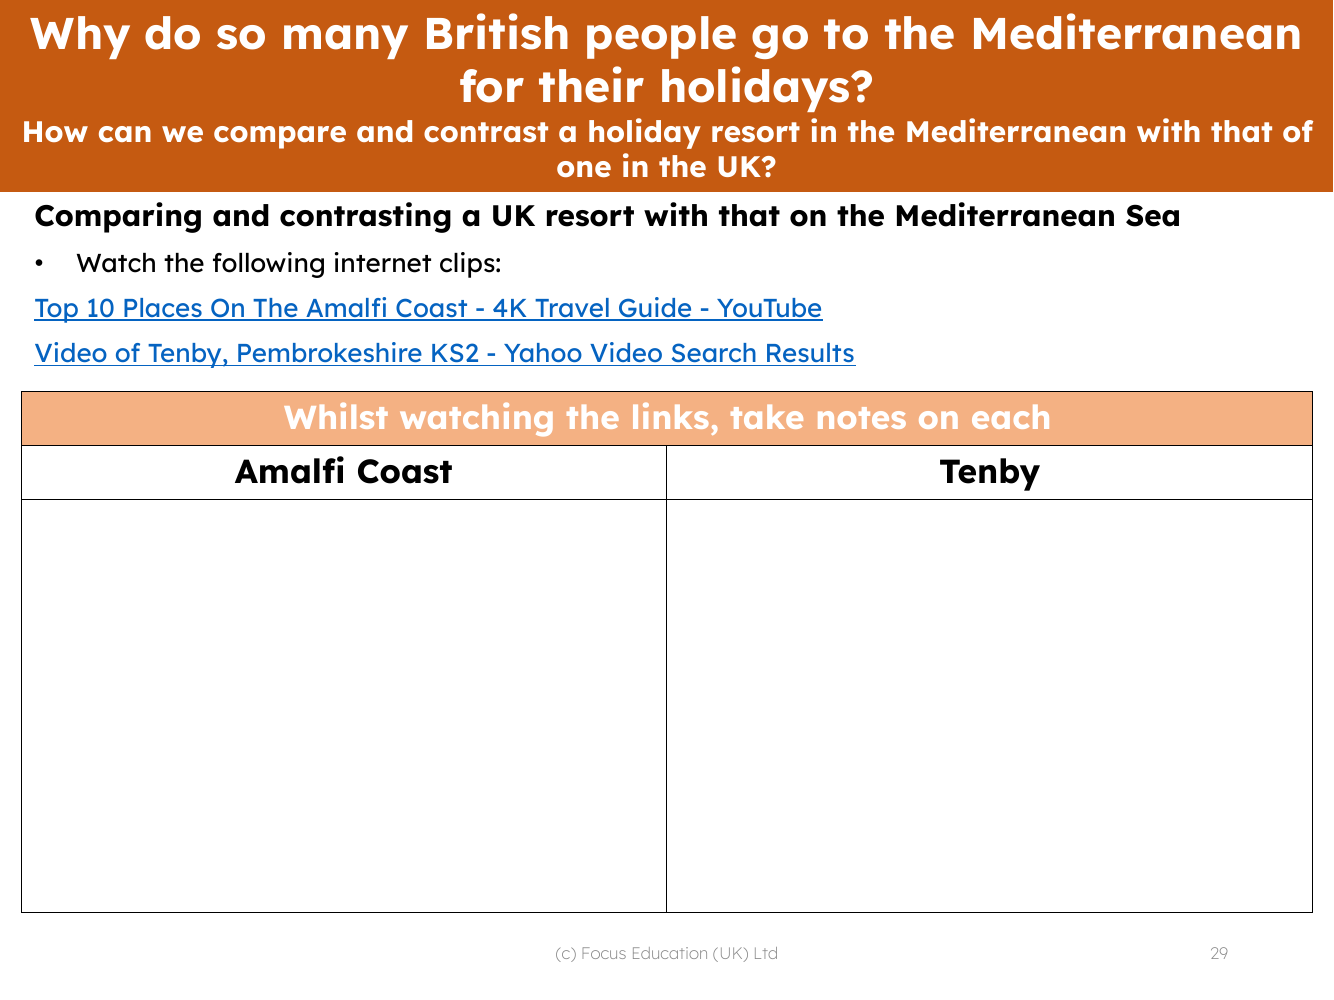 Compare the Amalfi Coast and Tenby - Notes sheet